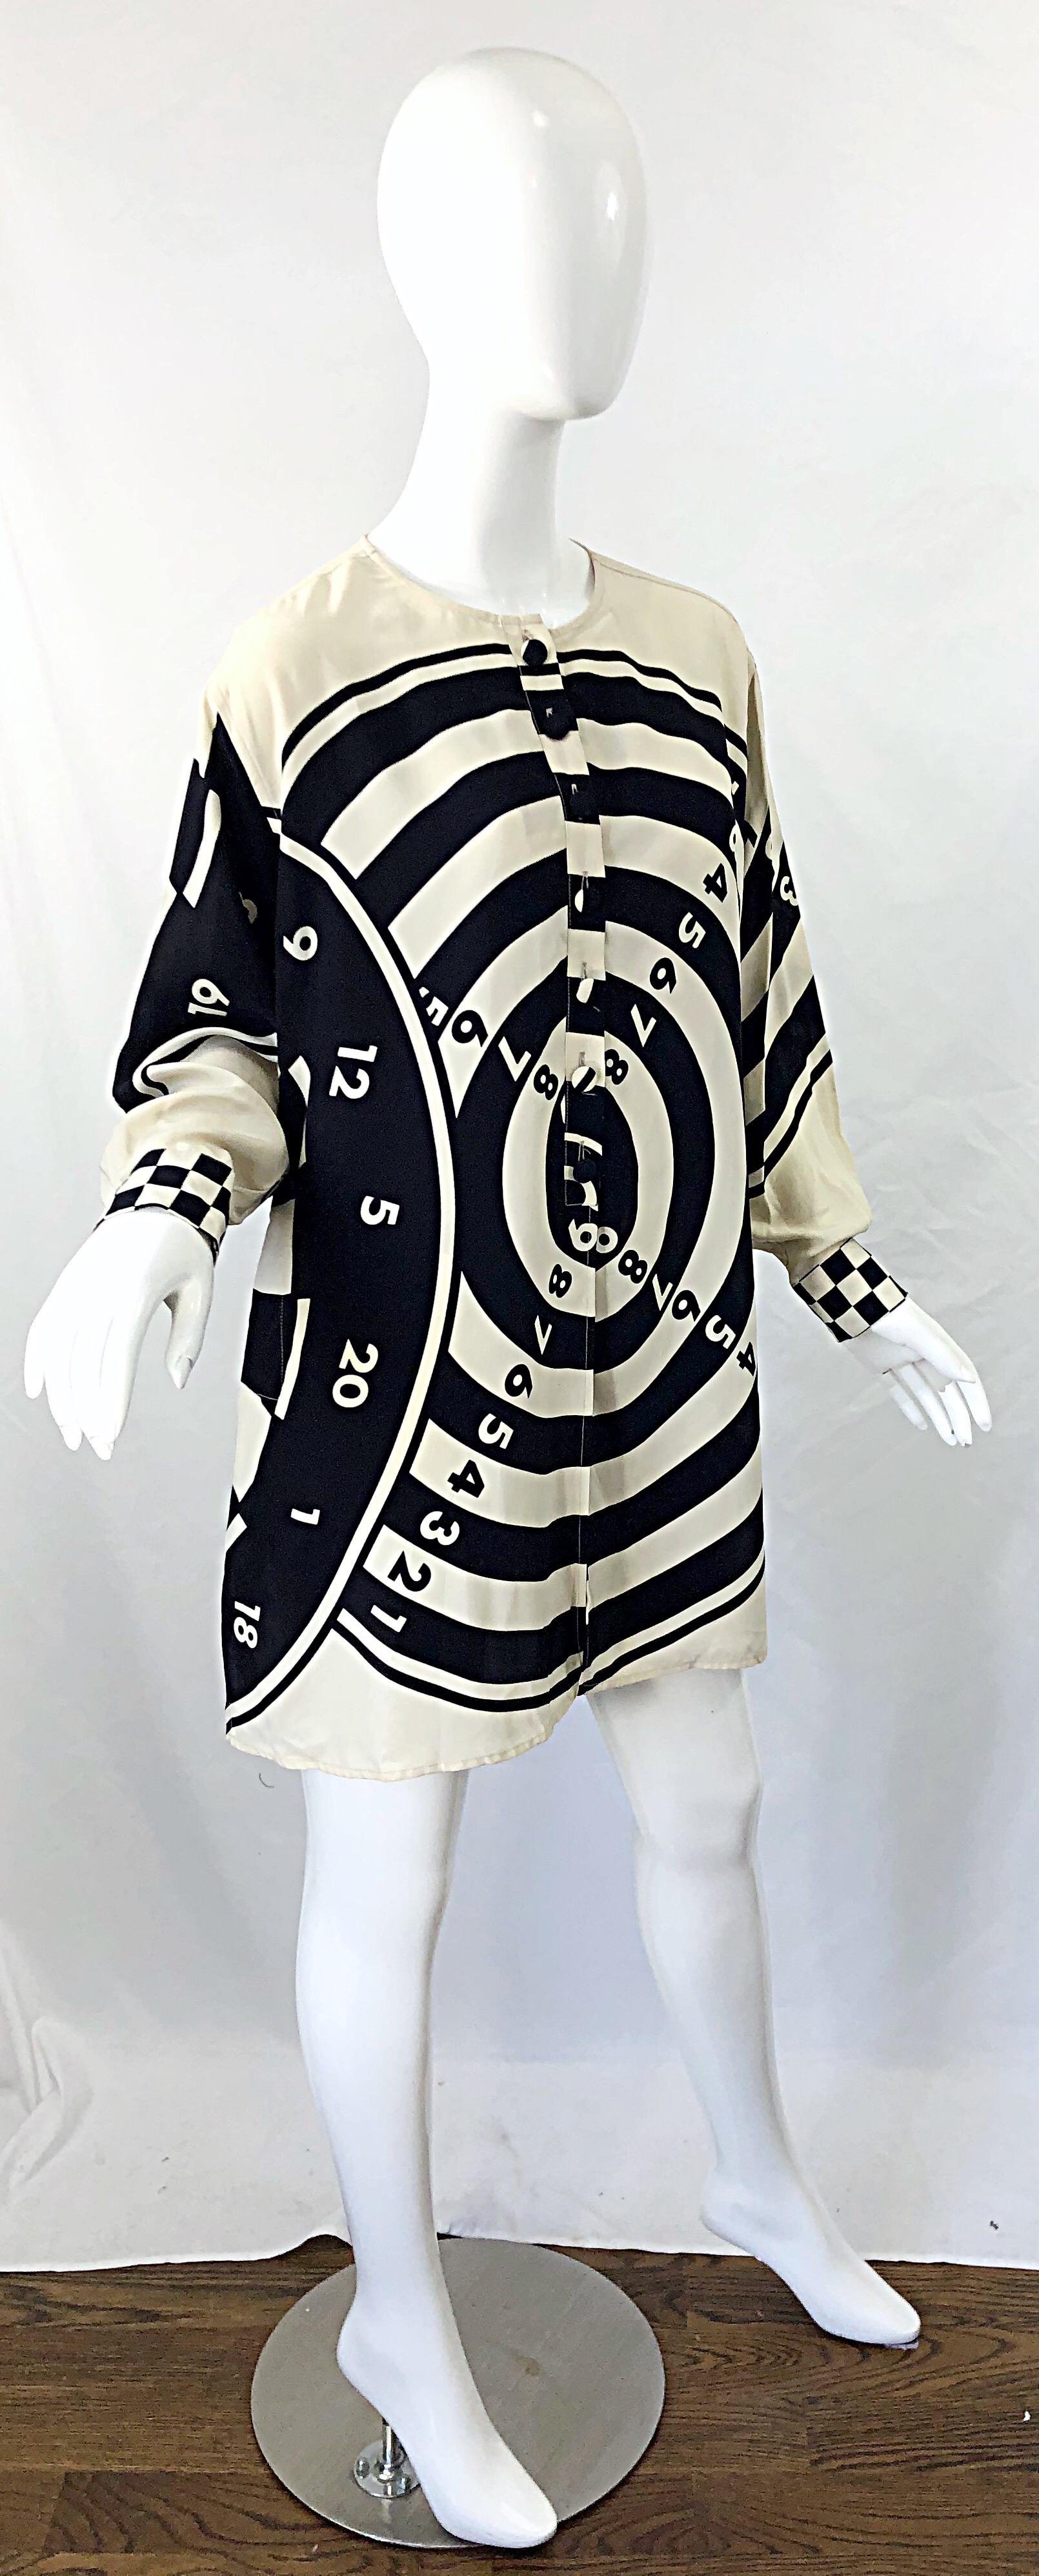 1980s Moschino Cheap & Chic Bullseye Black and White Size 8 Vintage Tunic Dress For Sale 7